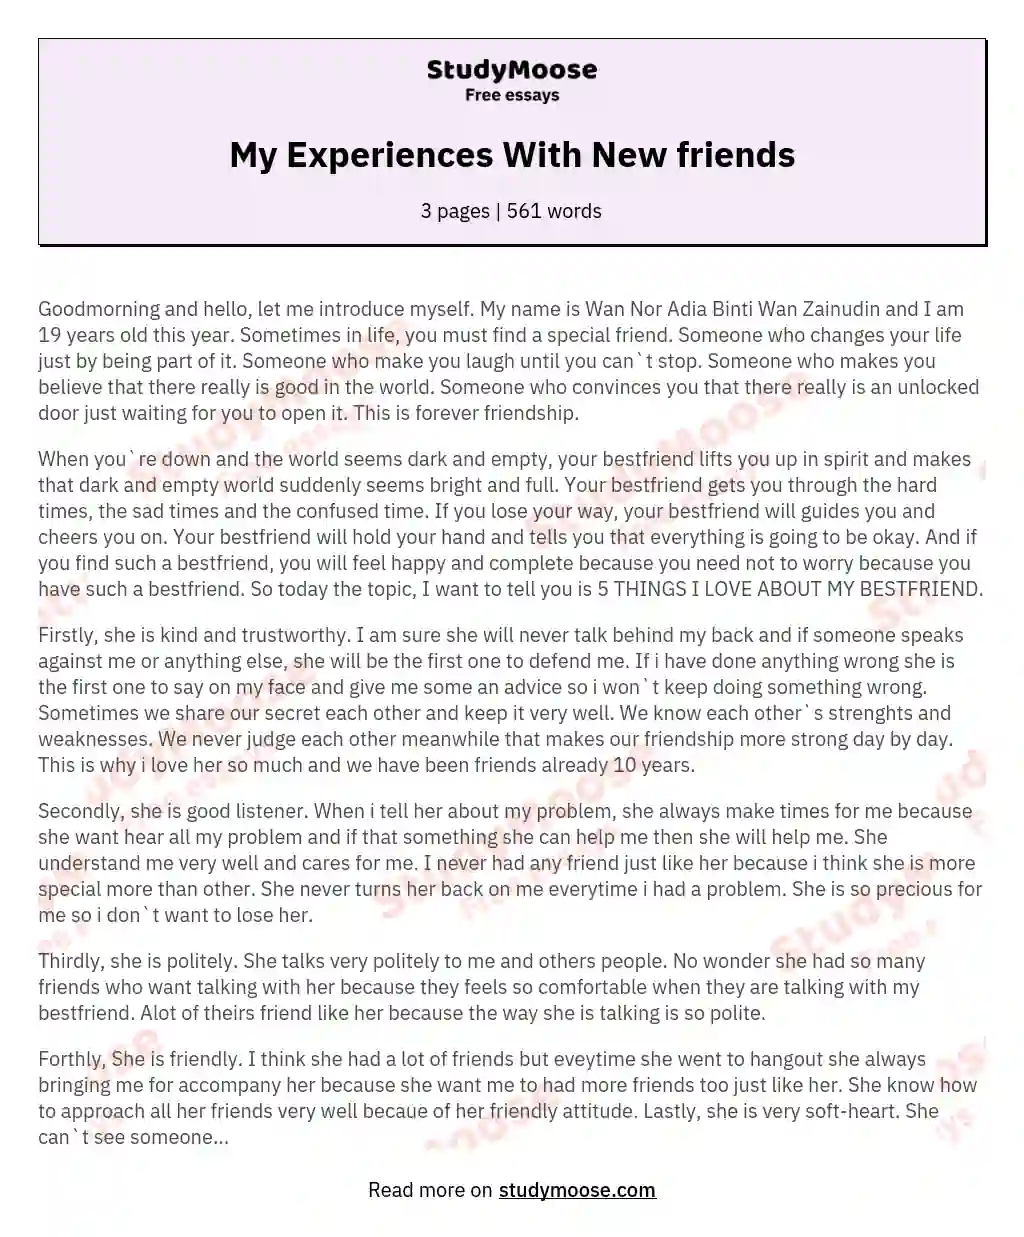 trip with friends essay